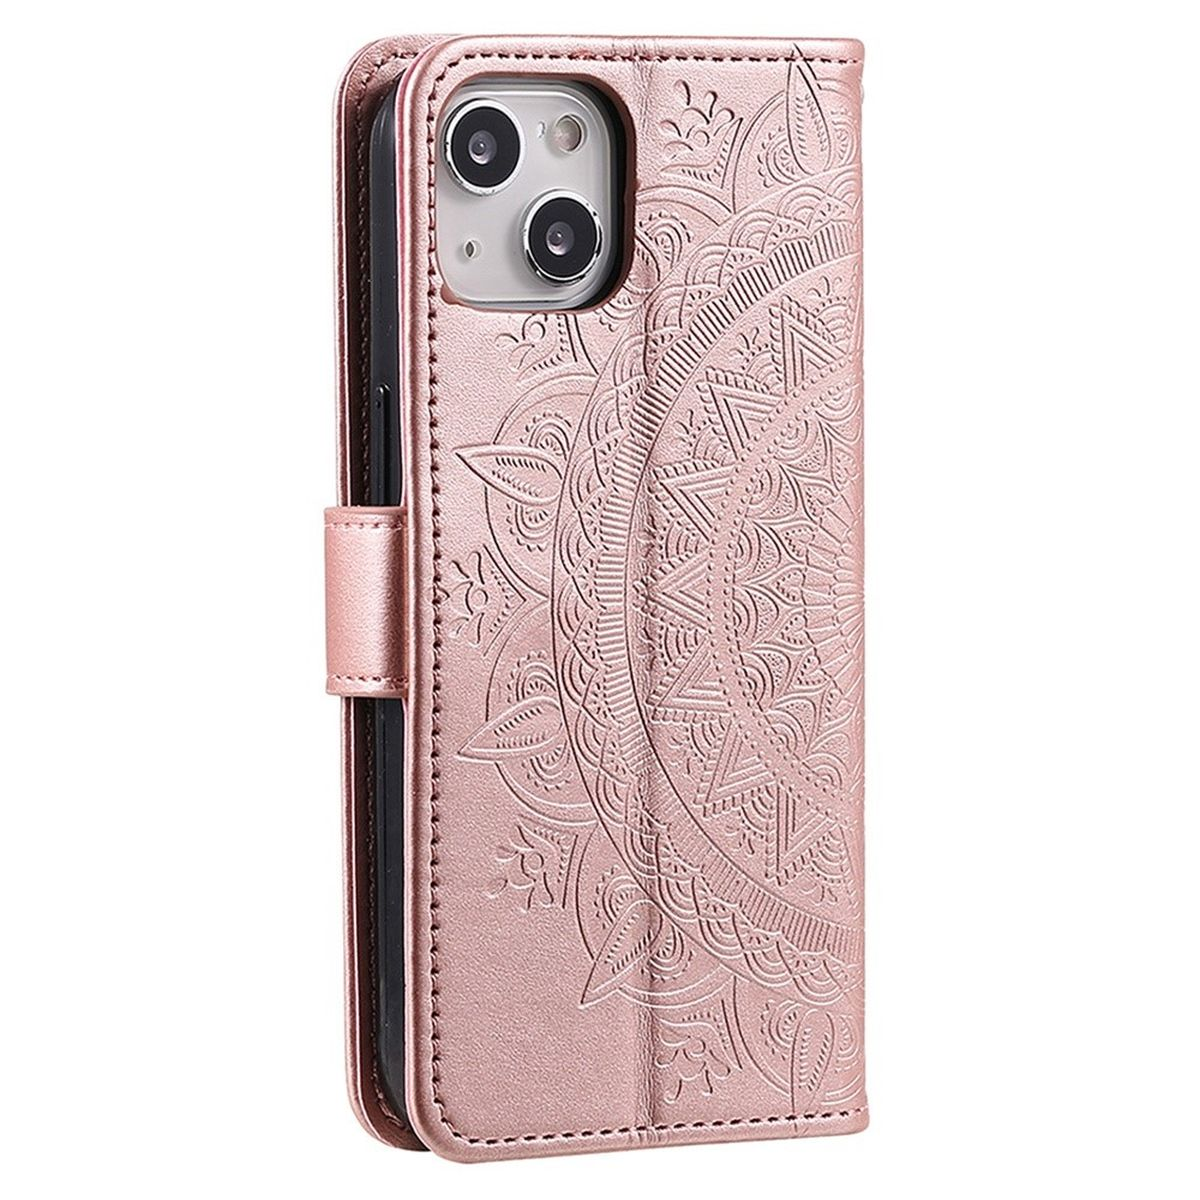 mit Apple, COVERKINGZ Bookcover, Mandala Klapphülle iPhone 14, Rosegold Muster,